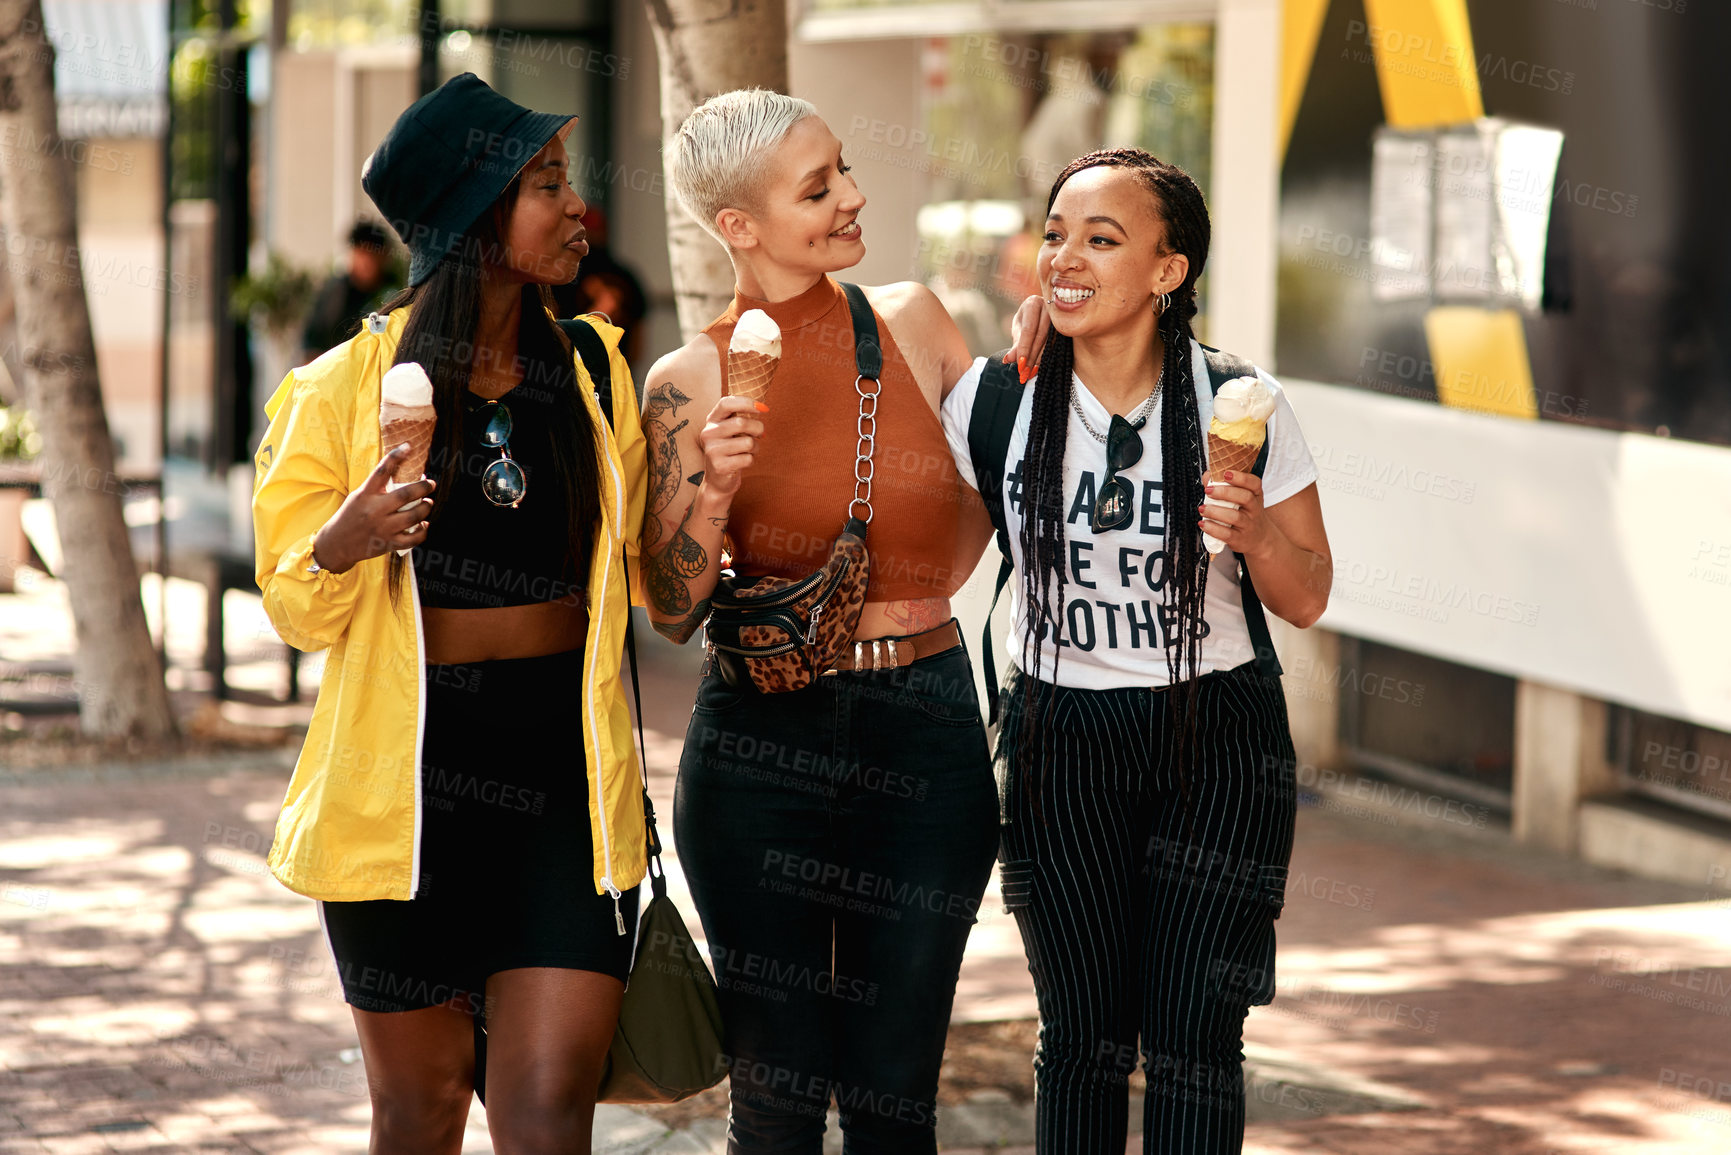 Buy stock photo Shot of three friends enjoying ice cream cones while out in the city